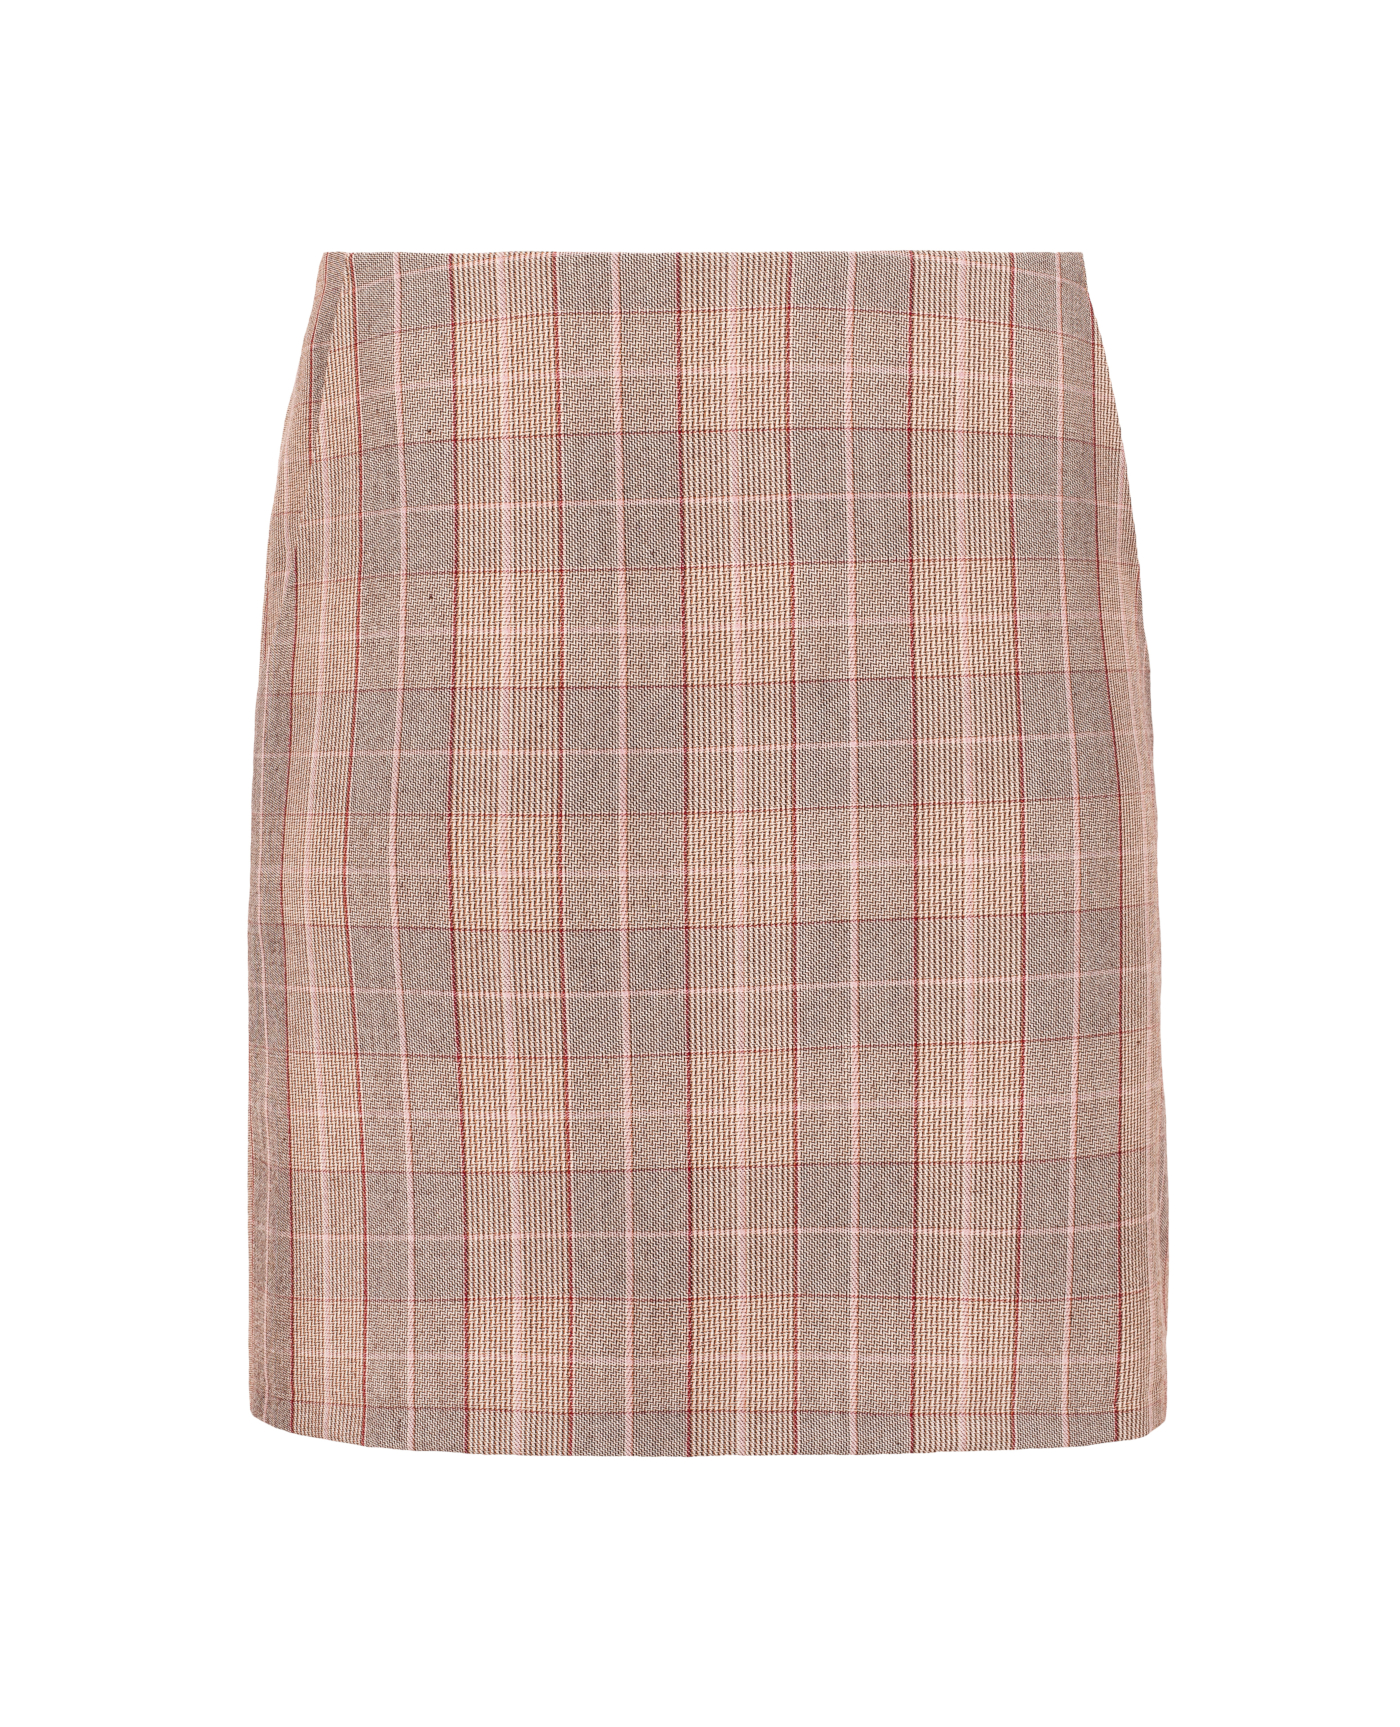 127RG | Kathryn check mini skirt with side pockets and hiddden zipper